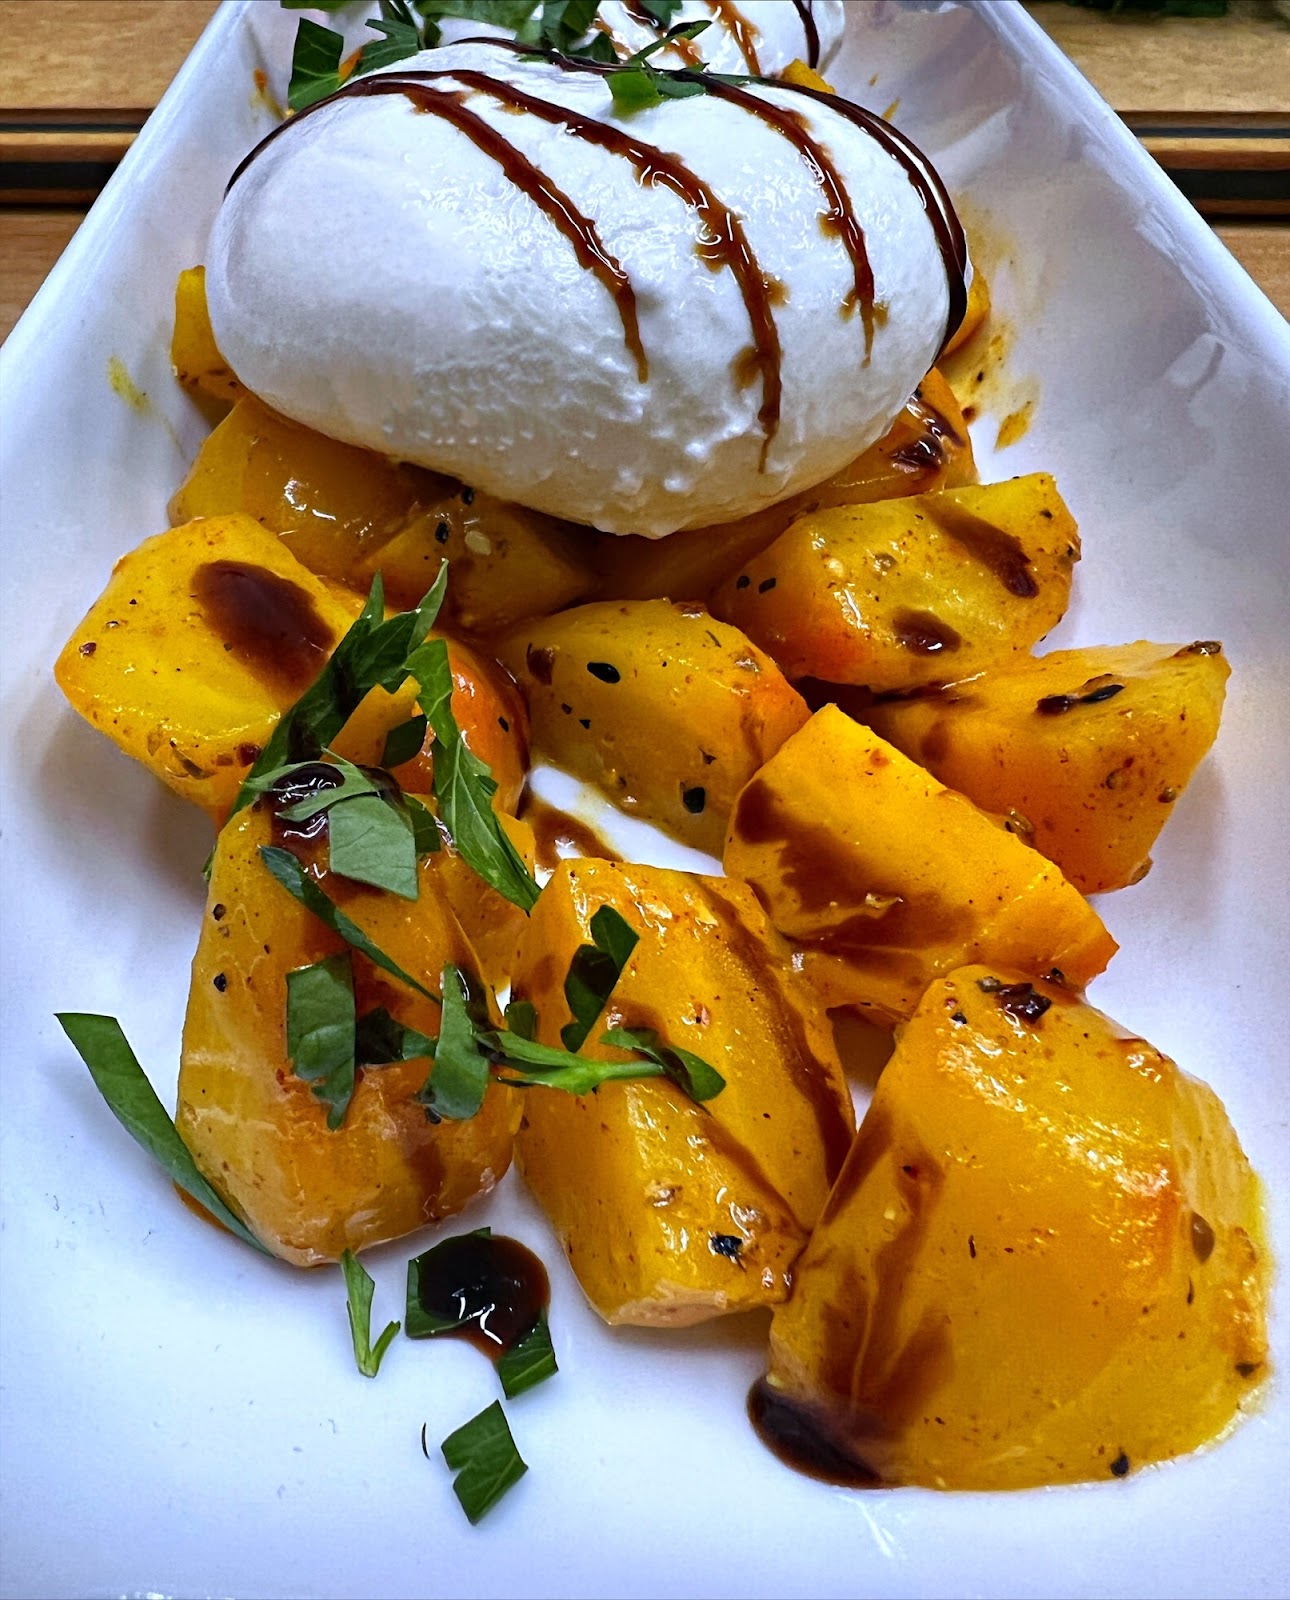 Chopped Golden beets provide a bed for creamy burrata cheese